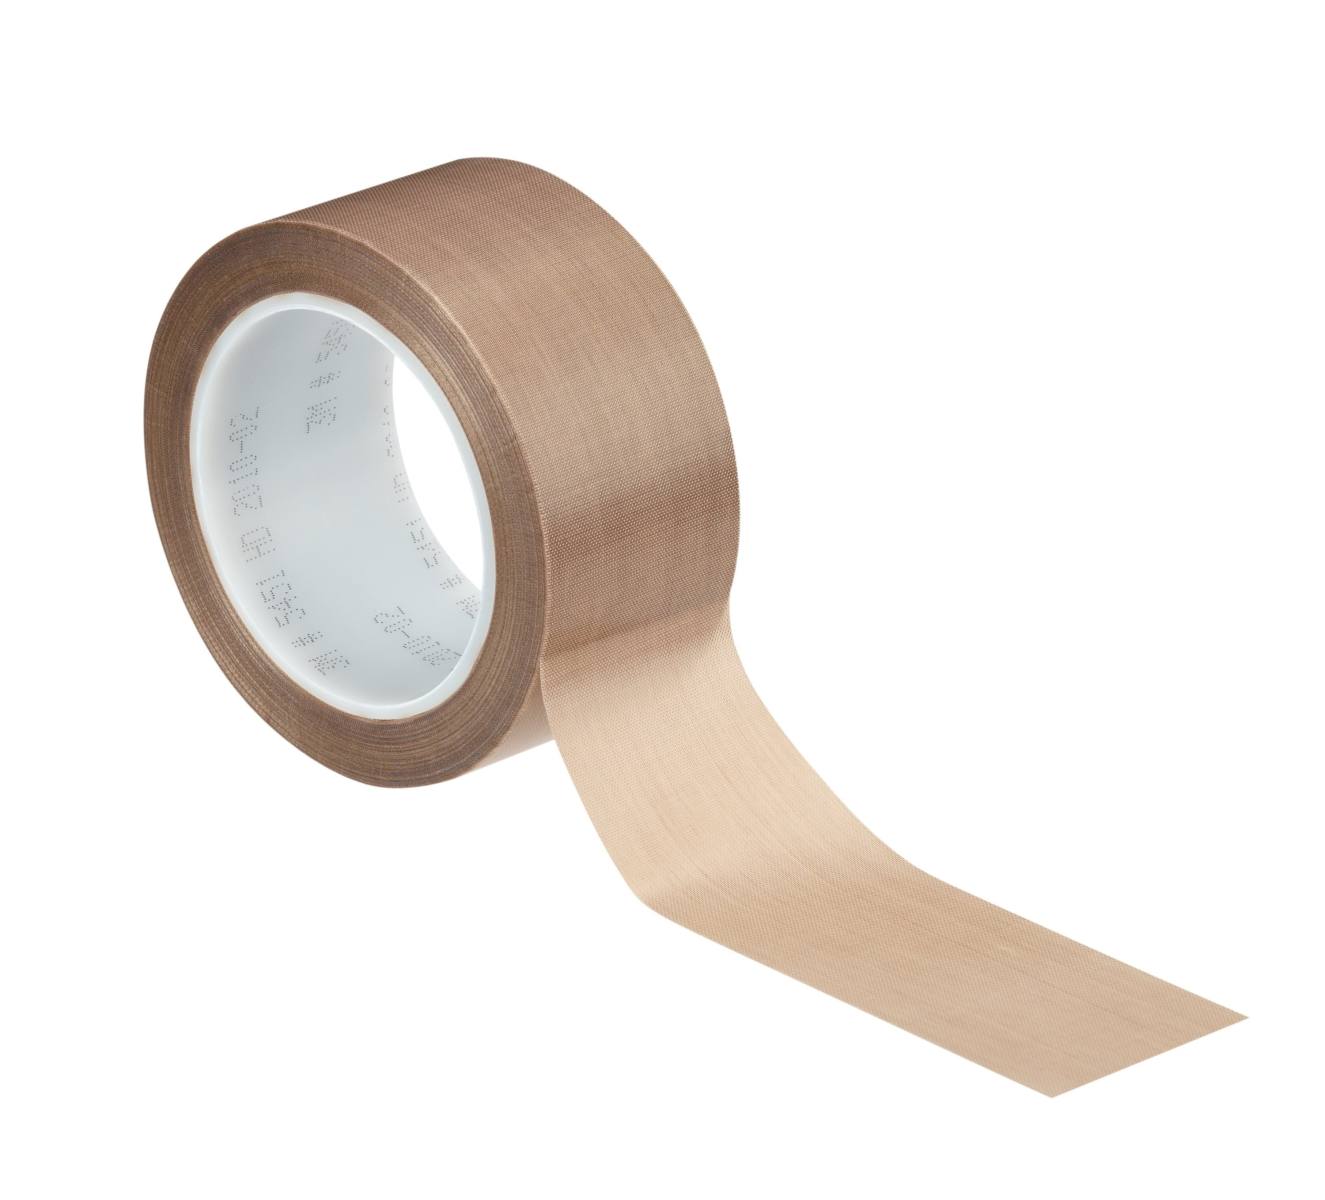 3M 5451 PTFE glass adhesive tape 254mmx33m, 0.14mm, silicone